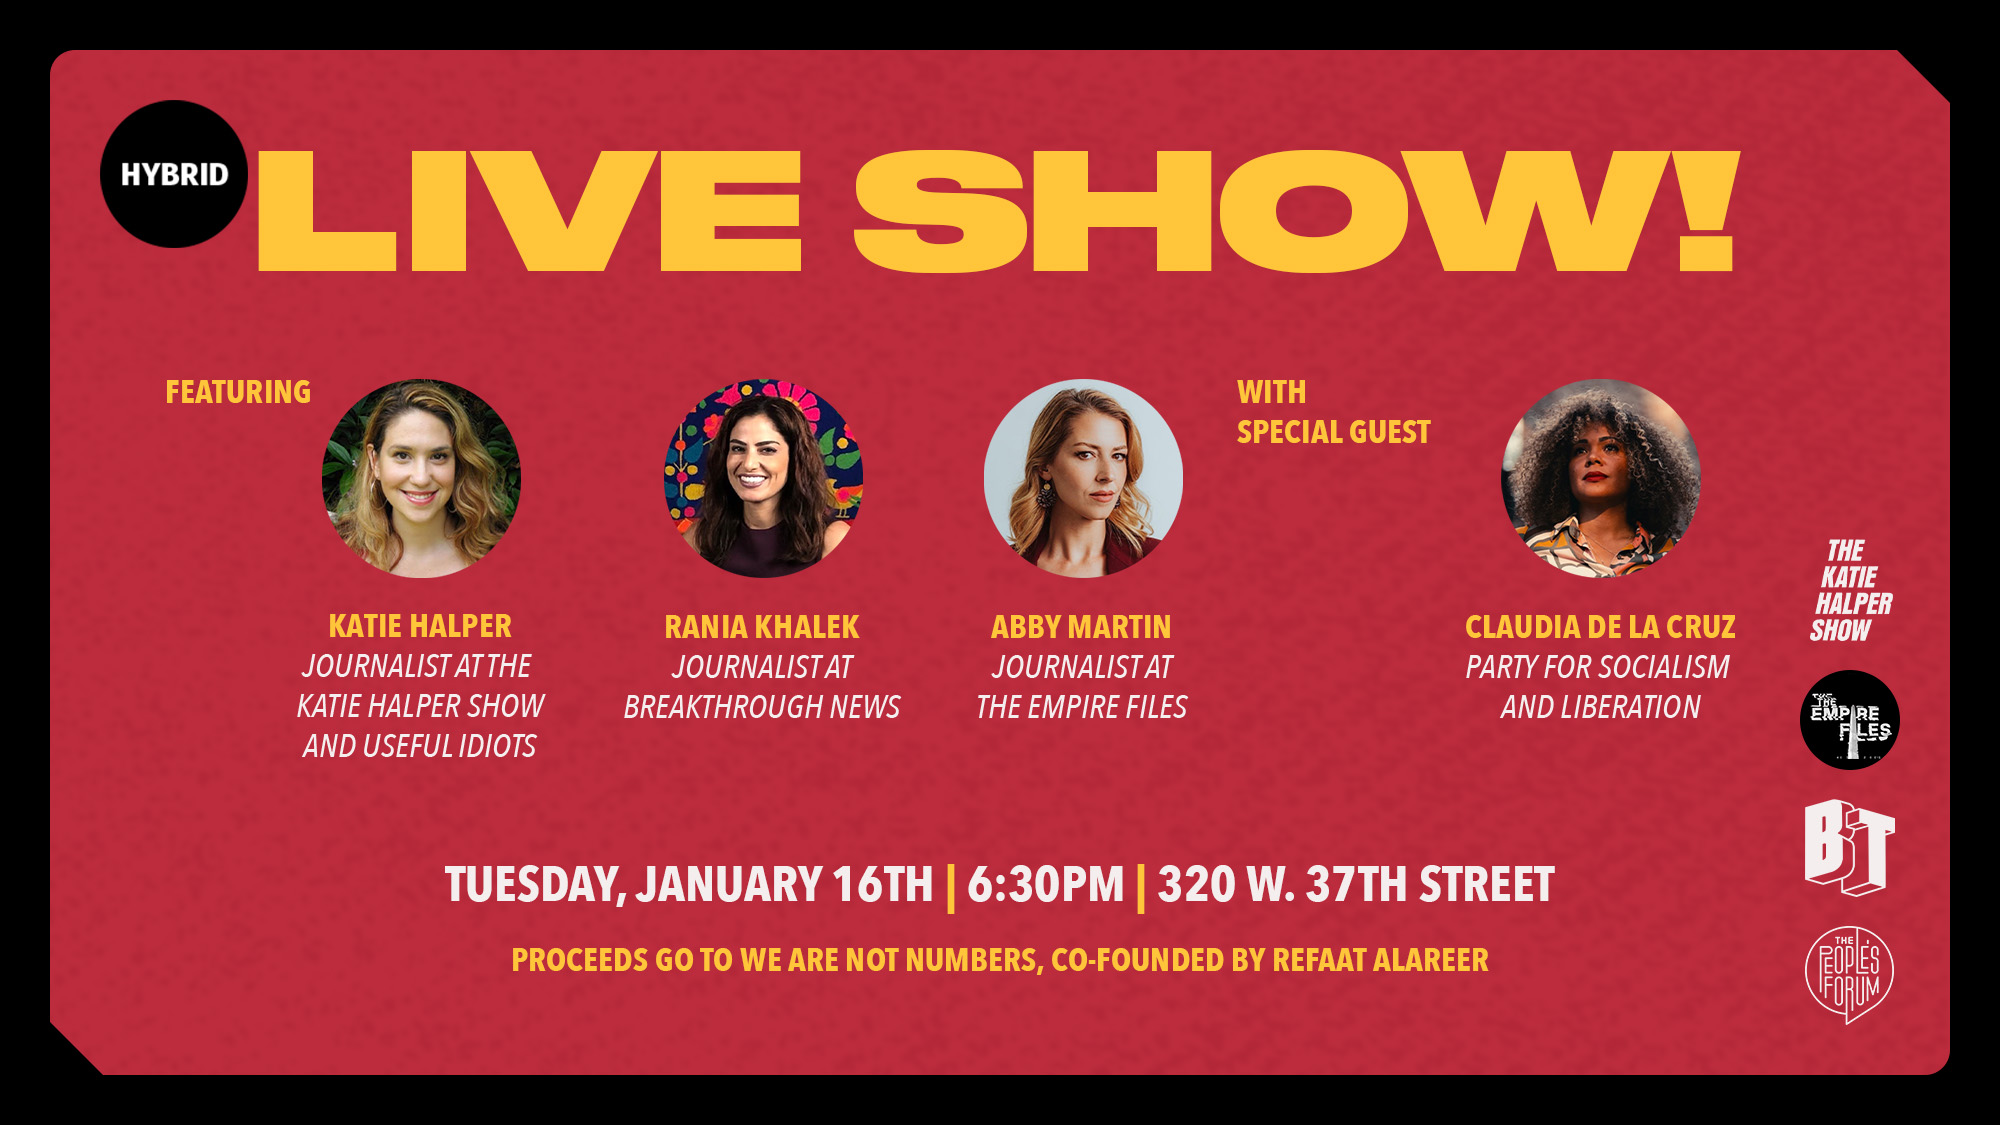 Red banner with a black border. In bold, yellow letters it reads: "LIVE SHOW!" Featuring: Katie Halper, Journalist at the Katie Halper Show and Useful Idiots, Rania Khalek, Journalist at BreakThrough News, Abby Martin, Journalist at The Empire Files with Special Guest Claudia de La Cruz from the Party for Socialism and Liberation. Tuesday, January 16th, 6:30PM, 320 W 37th Street. Proceeds go to We Are Not Numbers, Co-Founded by Refaat Alareer